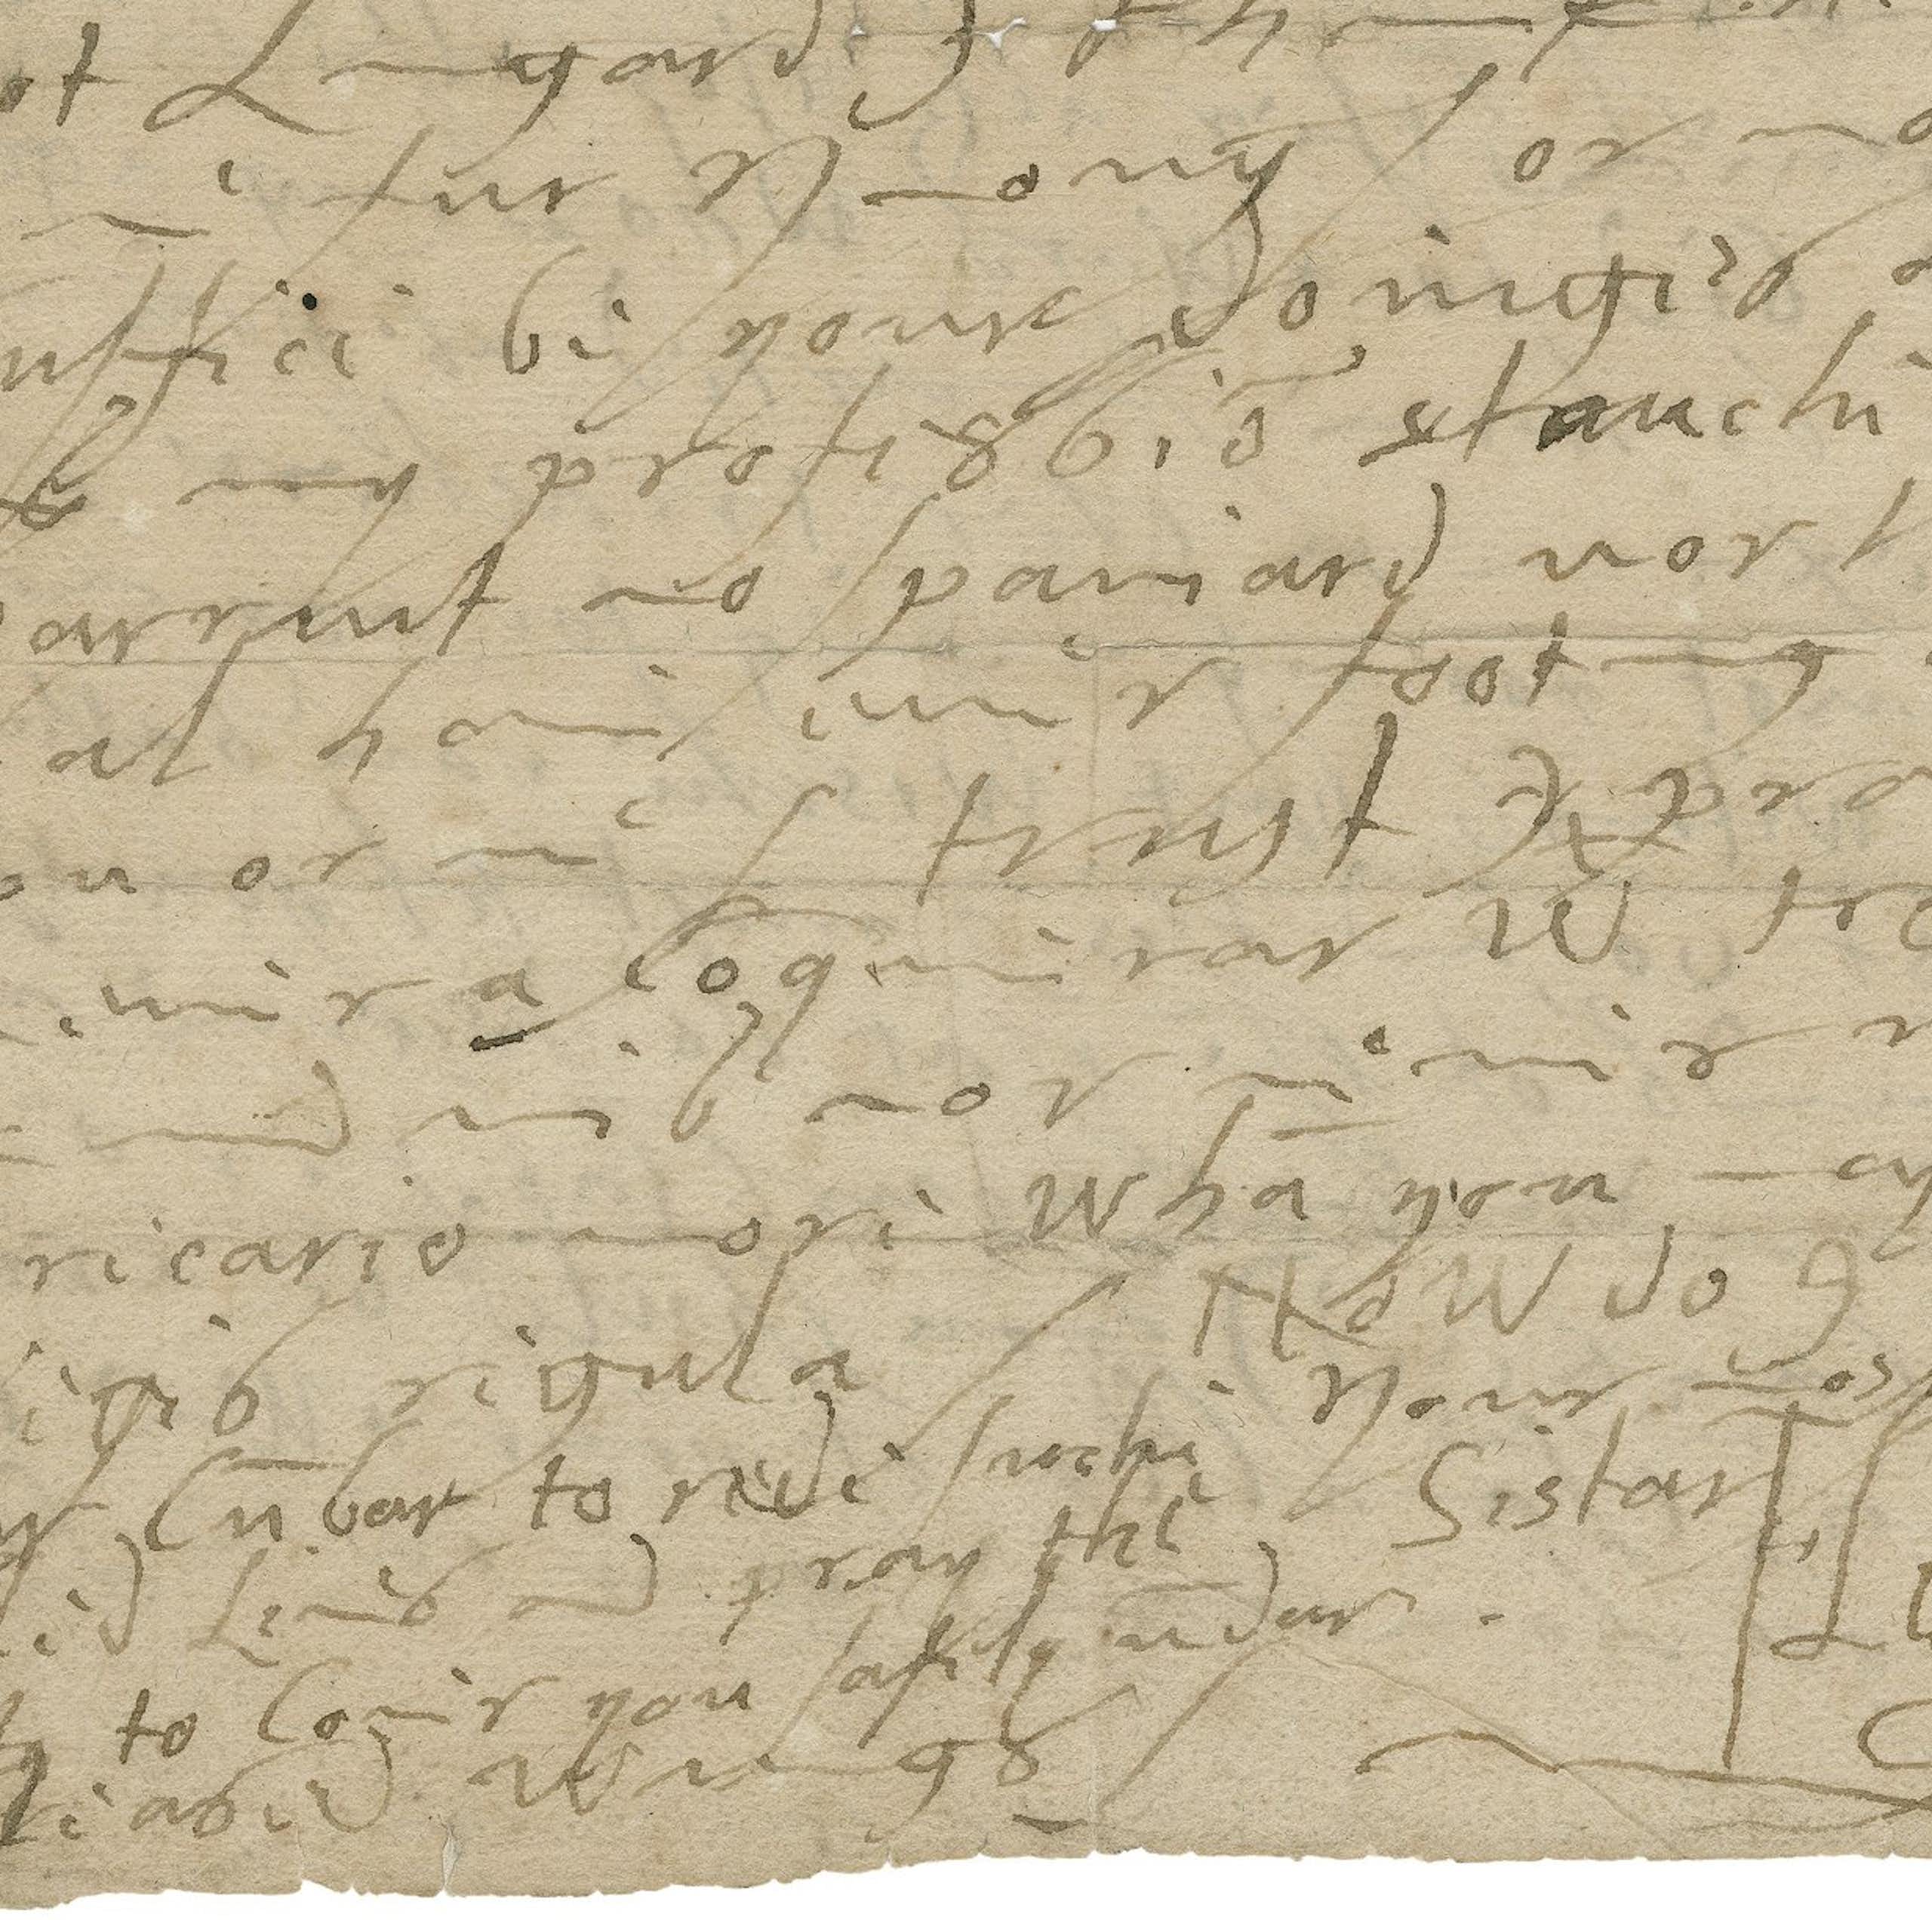 The bottom half of a page of a letter in the handwriting of Queen Elizabeth I. Elizabeth’s signature is visible in the bottom right corner of the letter. The paper, now tan colored, is inscribed in brown ink. The text gets increasingly compressed towards the bottom of the letter. There are several creases on the page, suggesting how the letter may have been folded when originally sent.